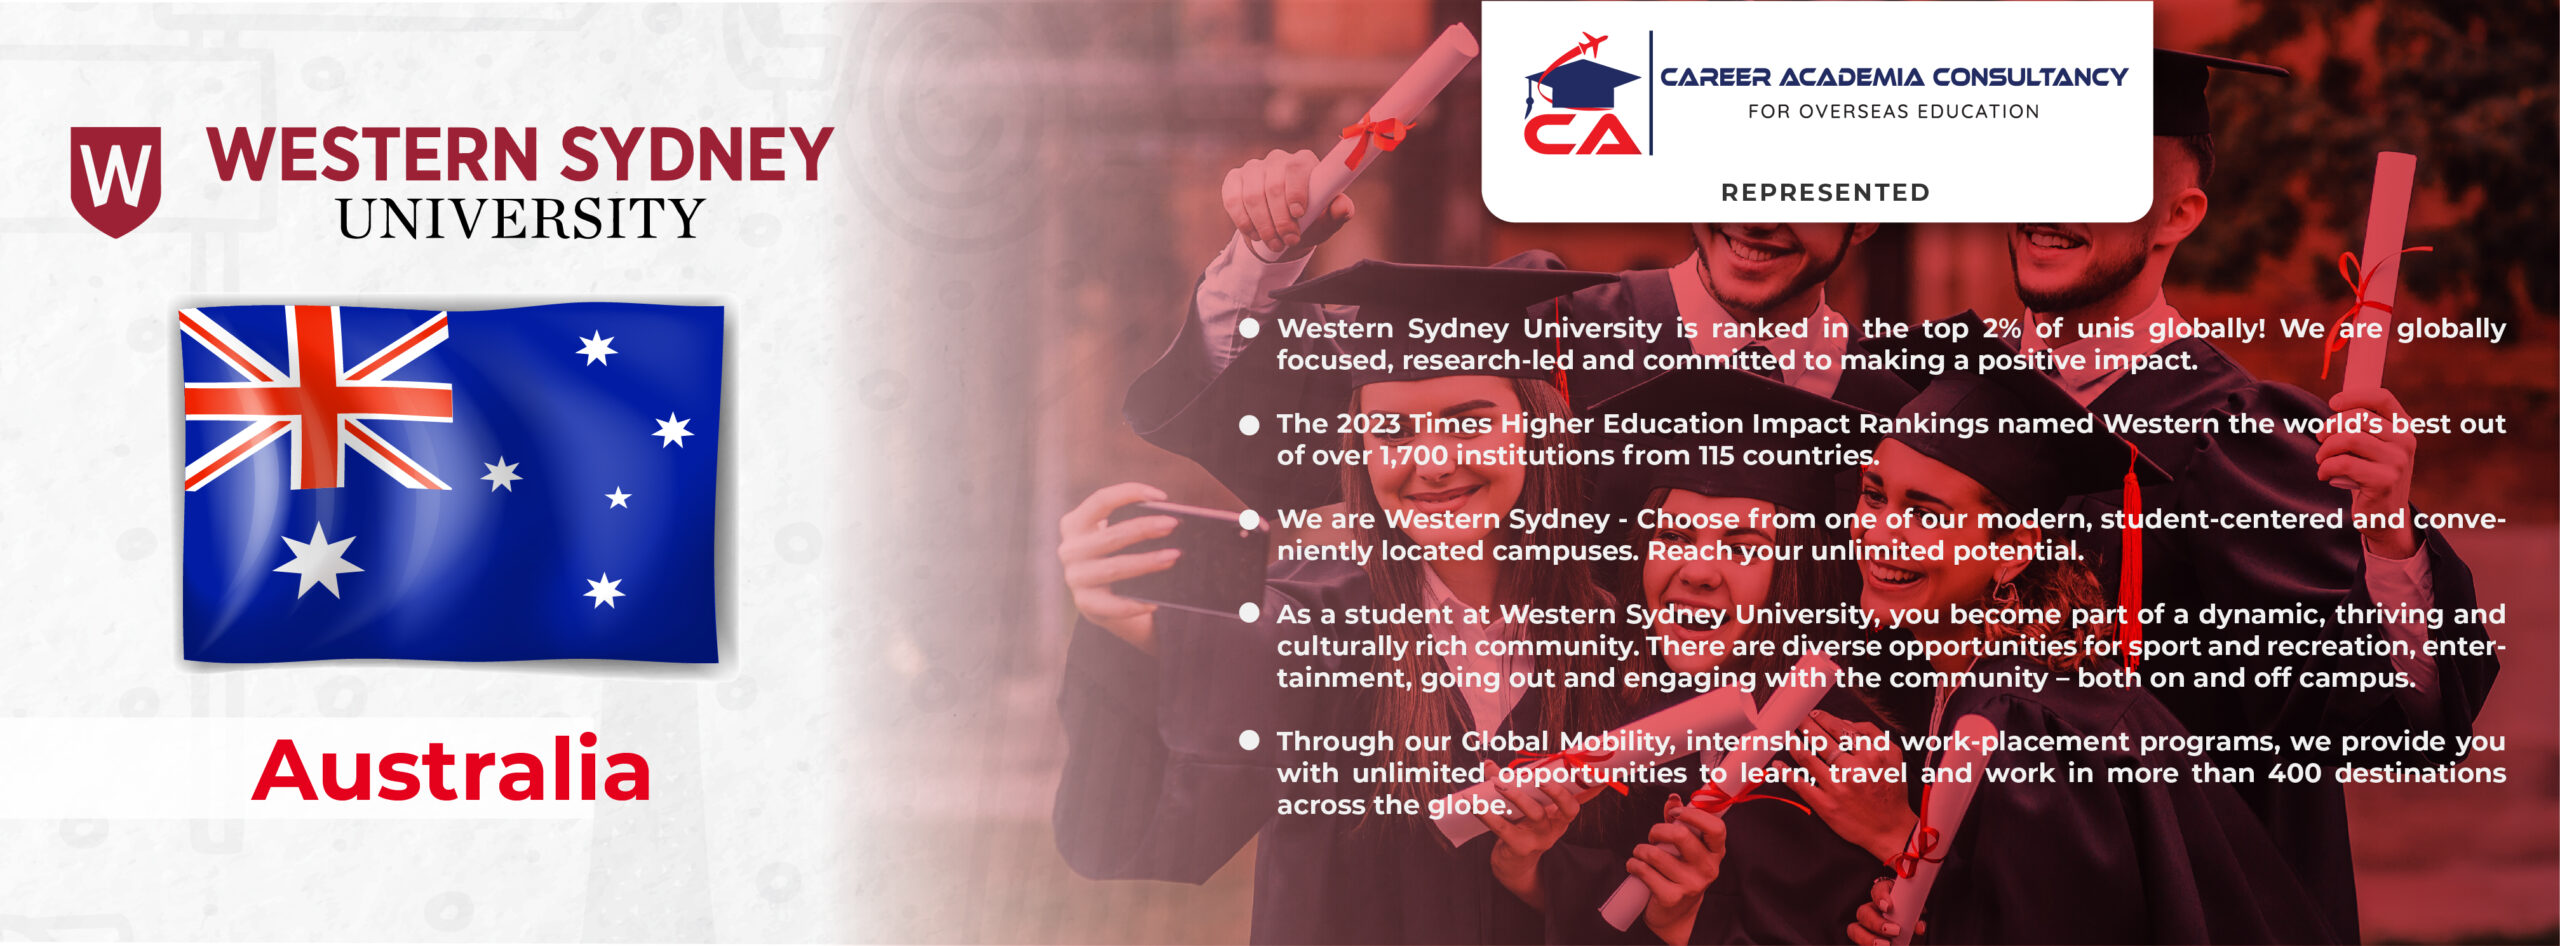 Step Up Your Career with Career Academia Consultancy.